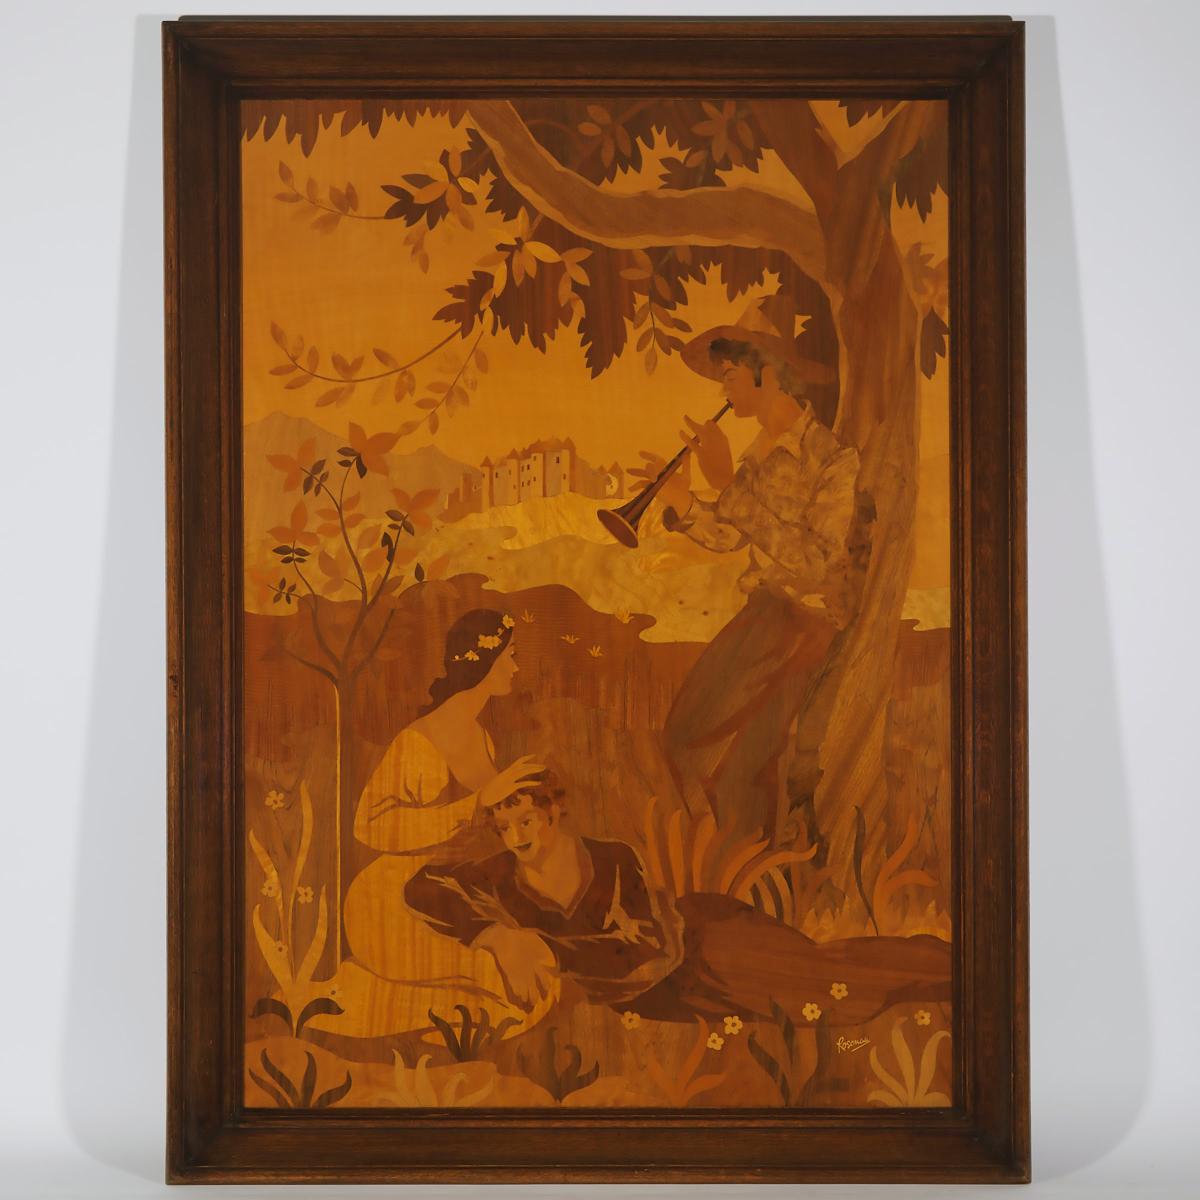 Large French Romantic Marquetry Picture by Pierre Rosenauc. c.1900, 53.25 x 39.75 in — 135.3 x 101 c